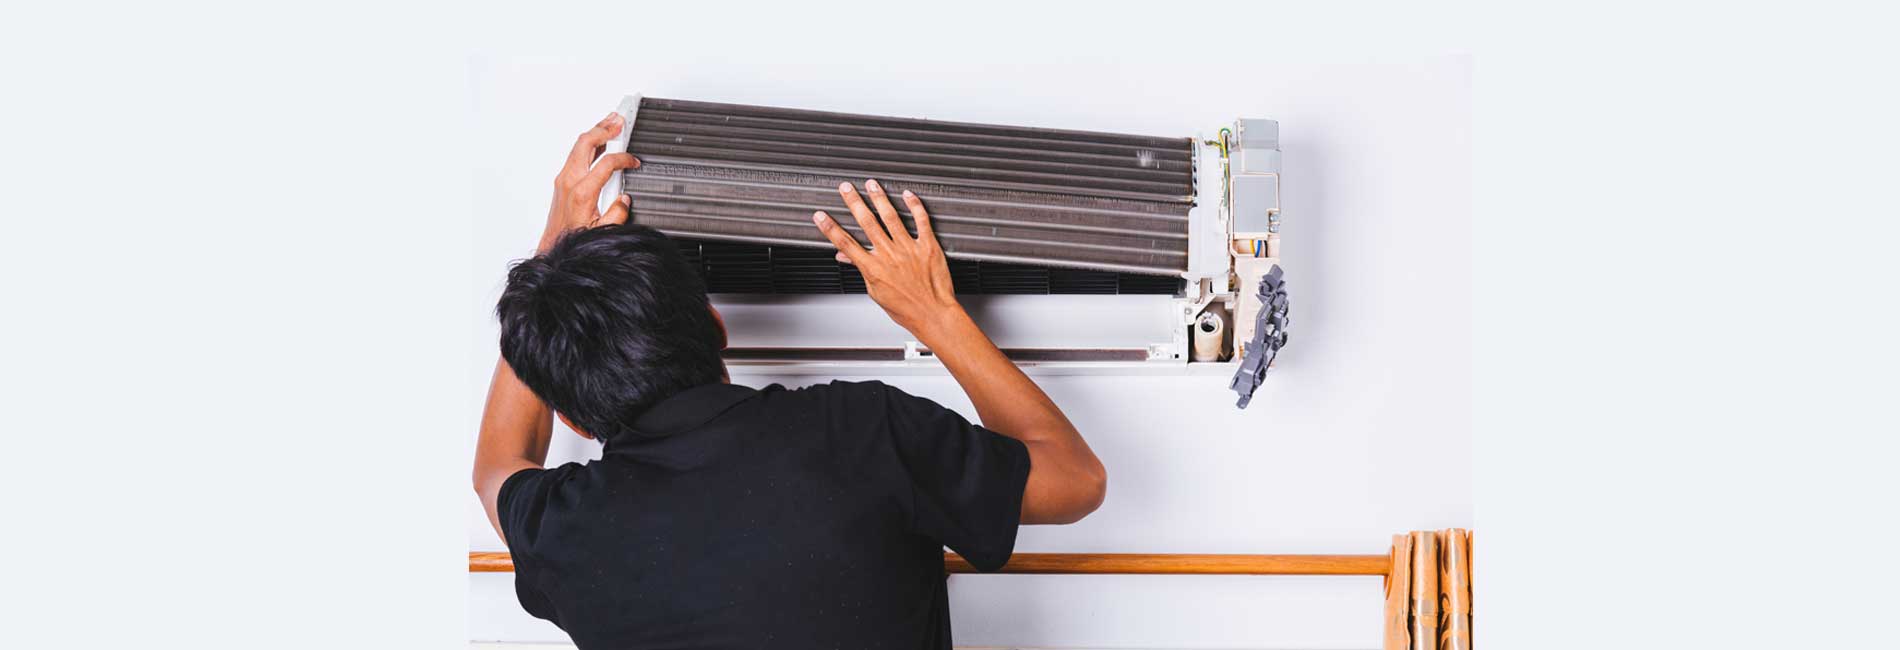 Why Should You Call Professionals for AC Tune-Up and Repairs